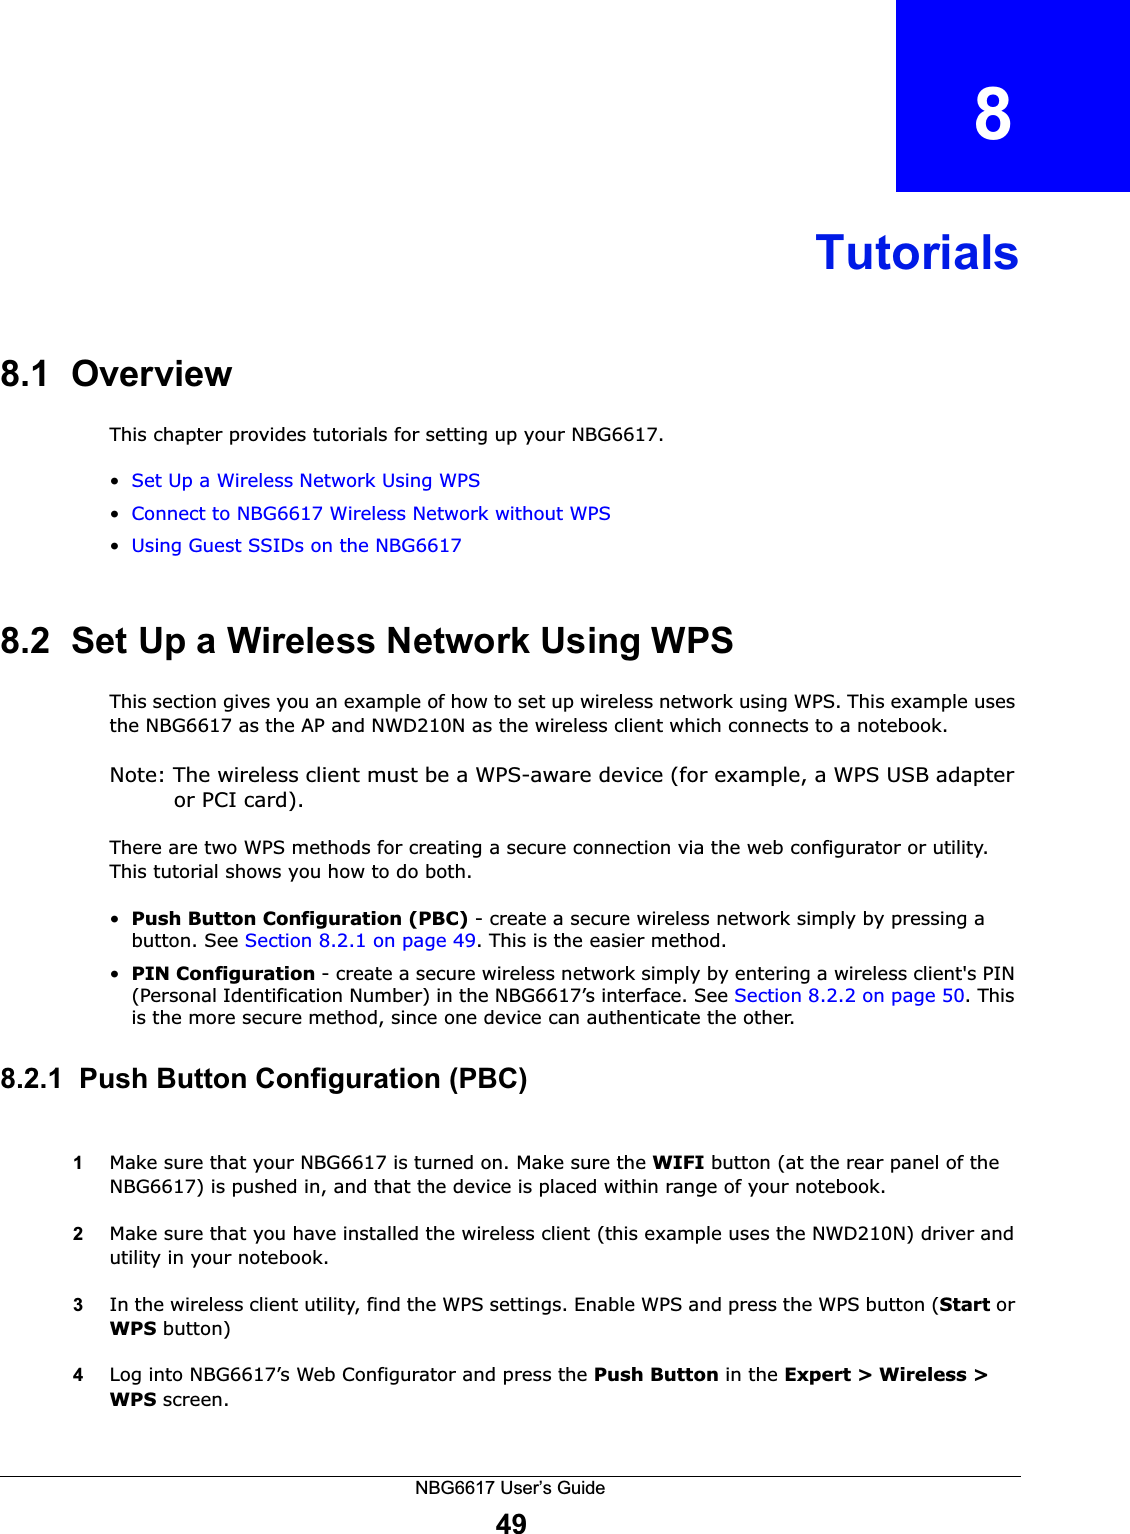 NBG6617 User’s Guide49CHAPTER   8Tutorials8.1  OverviewThis chapter provides tutorials for setting up your NBG6617.•Set Up a Wireless Network Using WPS•Connect to NBG6617 Wireless Network without WPS•Using Guest SSIDs on the NBG66178.2  Set Up a Wireless Network Using WPSThis section gives you an example of how to set up wireless network using WPS. This example uses the NBG6617 as the AP and NWD210N as the wireless client which connects to a notebook. Note: The wireless client must be a WPS-aware device (for example, a WPS USB adapter or PCI card).There are two WPS methods for creating a secure connection via the web configurator or utility. This tutorial shows you how to do both.•Push Button Configuration (PBC) - create a secure wireless network simply by pressing a button. See Section 8.2.1 on page 49. This is the easier method.•PIN Configuration - create a secure wireless network simply by entering a wireless client&apos;s PIN (Personal Identification Number) in the NBG6617’s interface. See Section 8.2.2 on page 50. This is the more secure method, since one device can authenticate the other.8.2.1  Push Button Configuration (PBC)1Make sure that your NBG6617 is turned on. Make sure the WIFI button (at the rear panel of the NBG6617) is pushed in, and that the device is placed within range of your notebook. 2Make sure that you have installed the wireless client (this example uses the NWD210N) driver and utility in your notebook.3In the wireless client utility, find the WPS settings. Enable WPS and press the WPS button (Start or WPS button)4Log into NBG6617’s Web Configurator and press the Push Button in the Expert &gt; Wireless &gt;  WPS screen. 